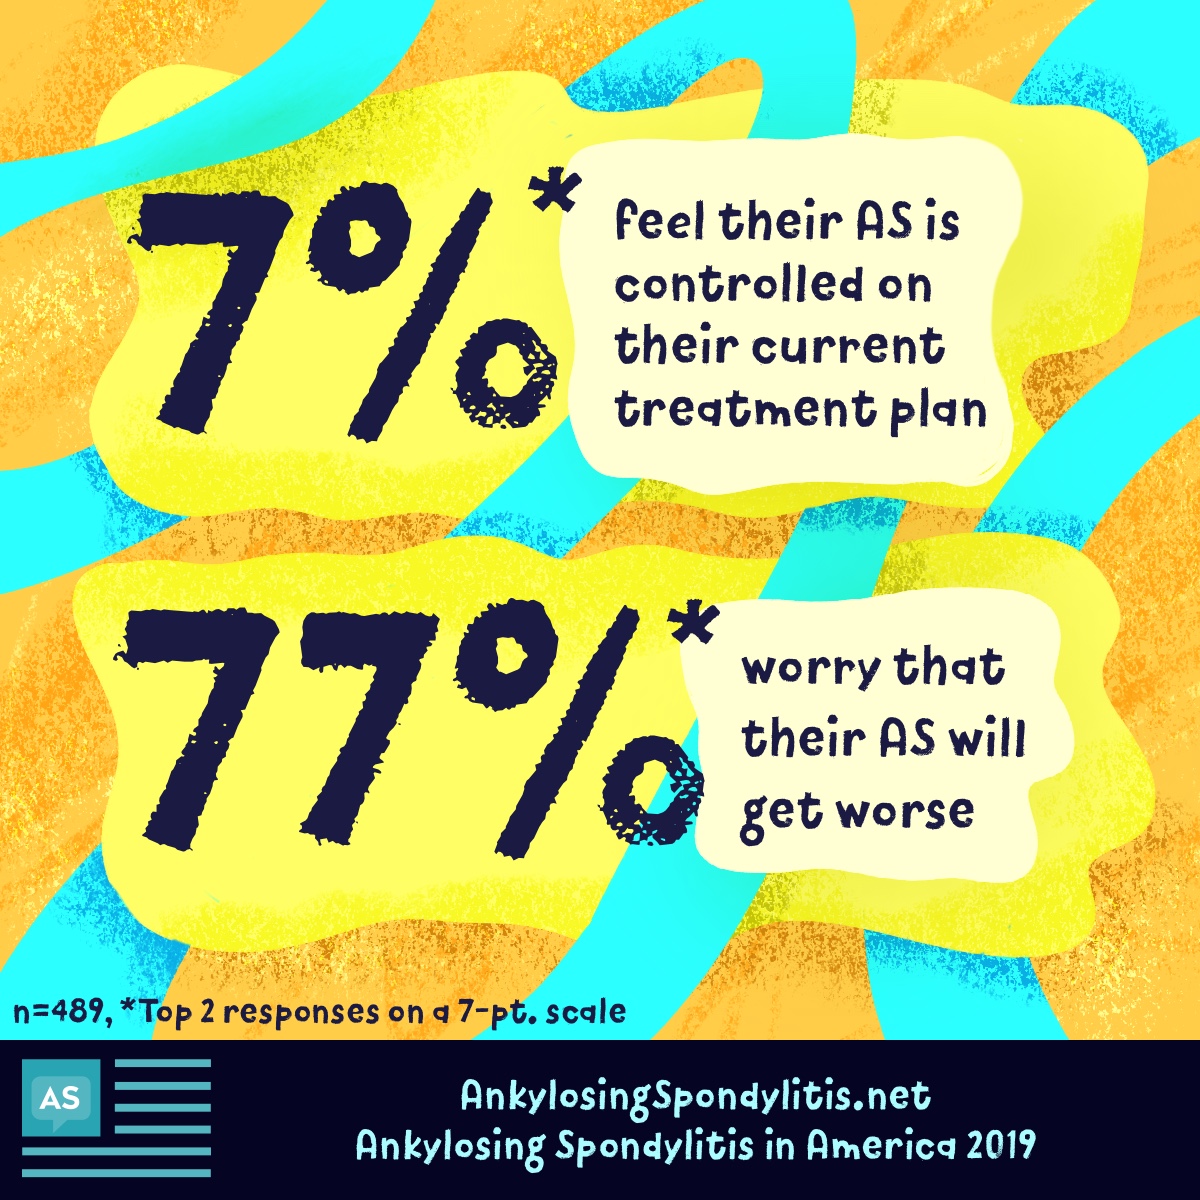 Statistics showing that 7% of people feel their AS is controlled on their current treatment plan and 77% worry that their AS will get worse.